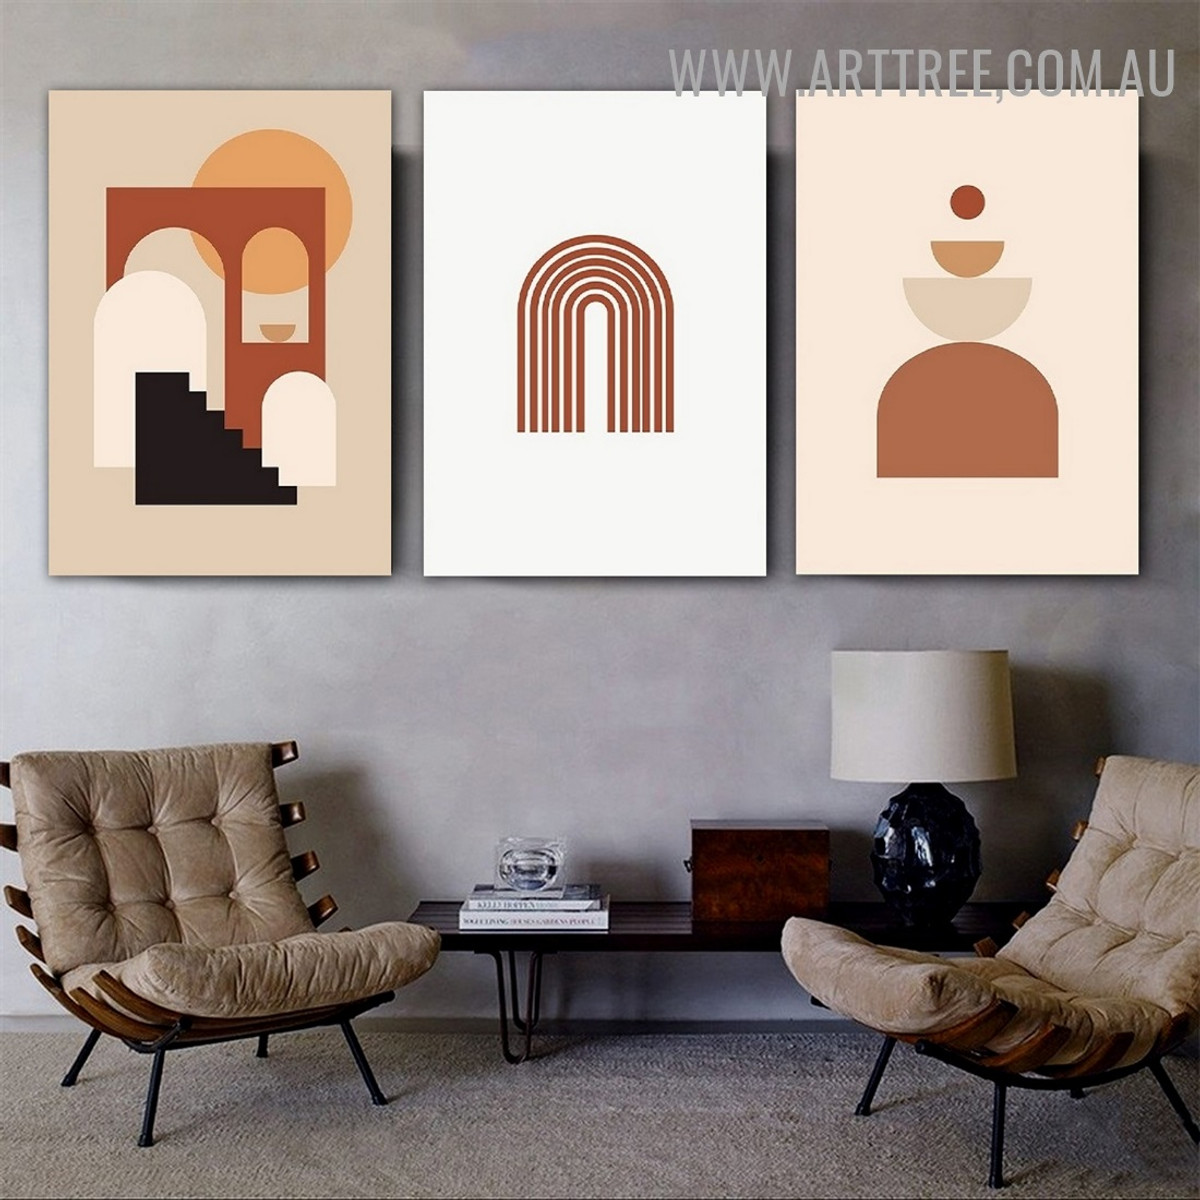 Semi Orb Stairs Curved Lines 3 Piece Abstract Geometrical Artwork Scandinavian Pattern Pic Canvas Print for Room Wall Getup